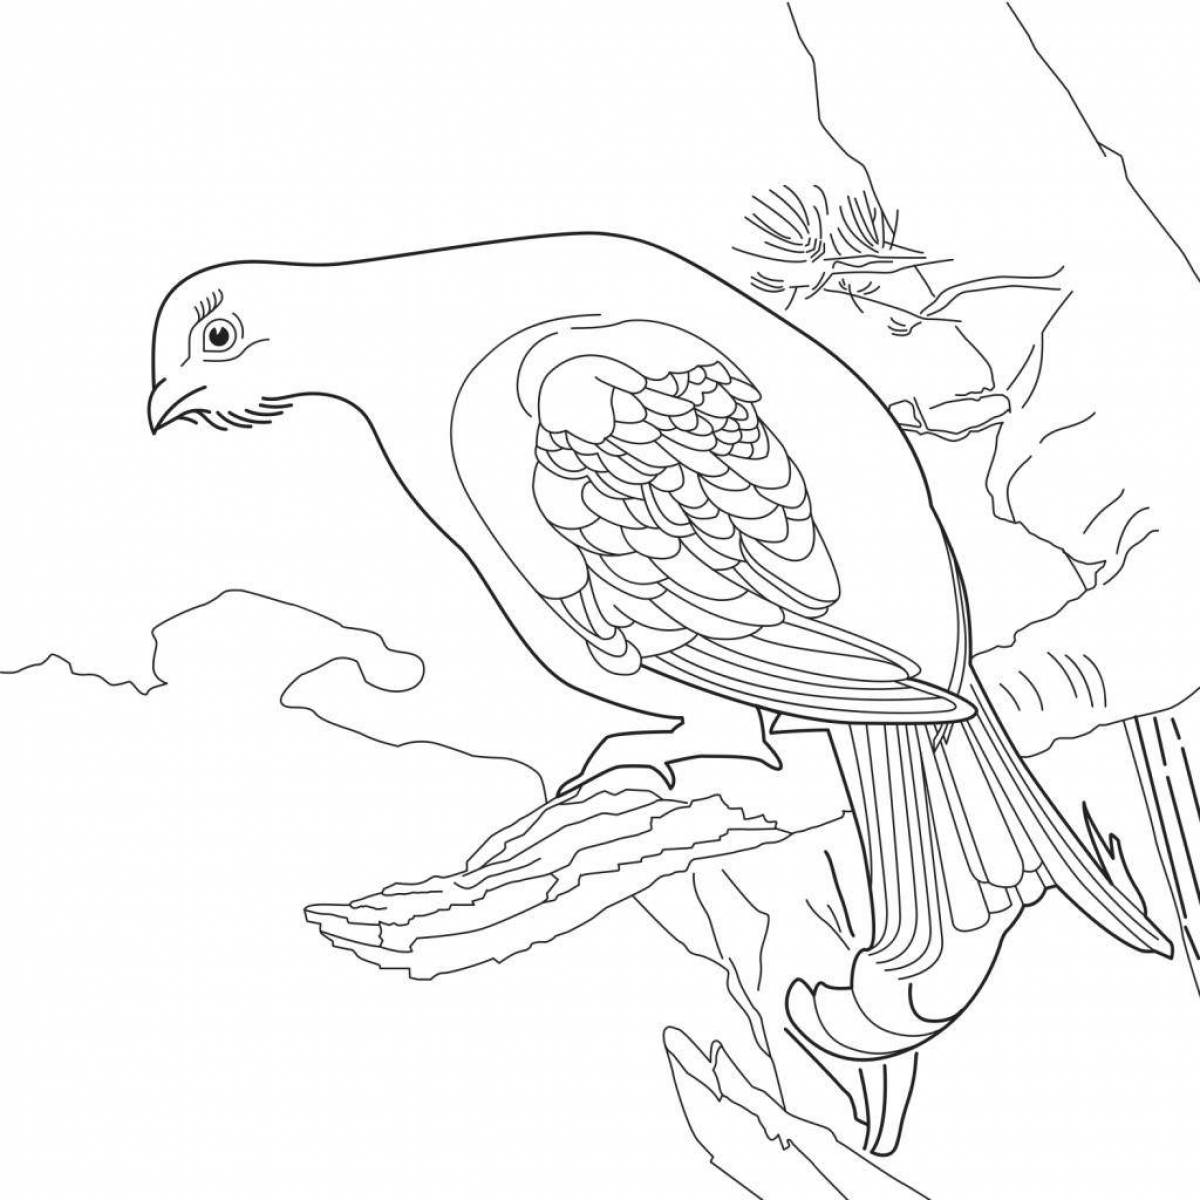 Fancy grouse and fox coloring page